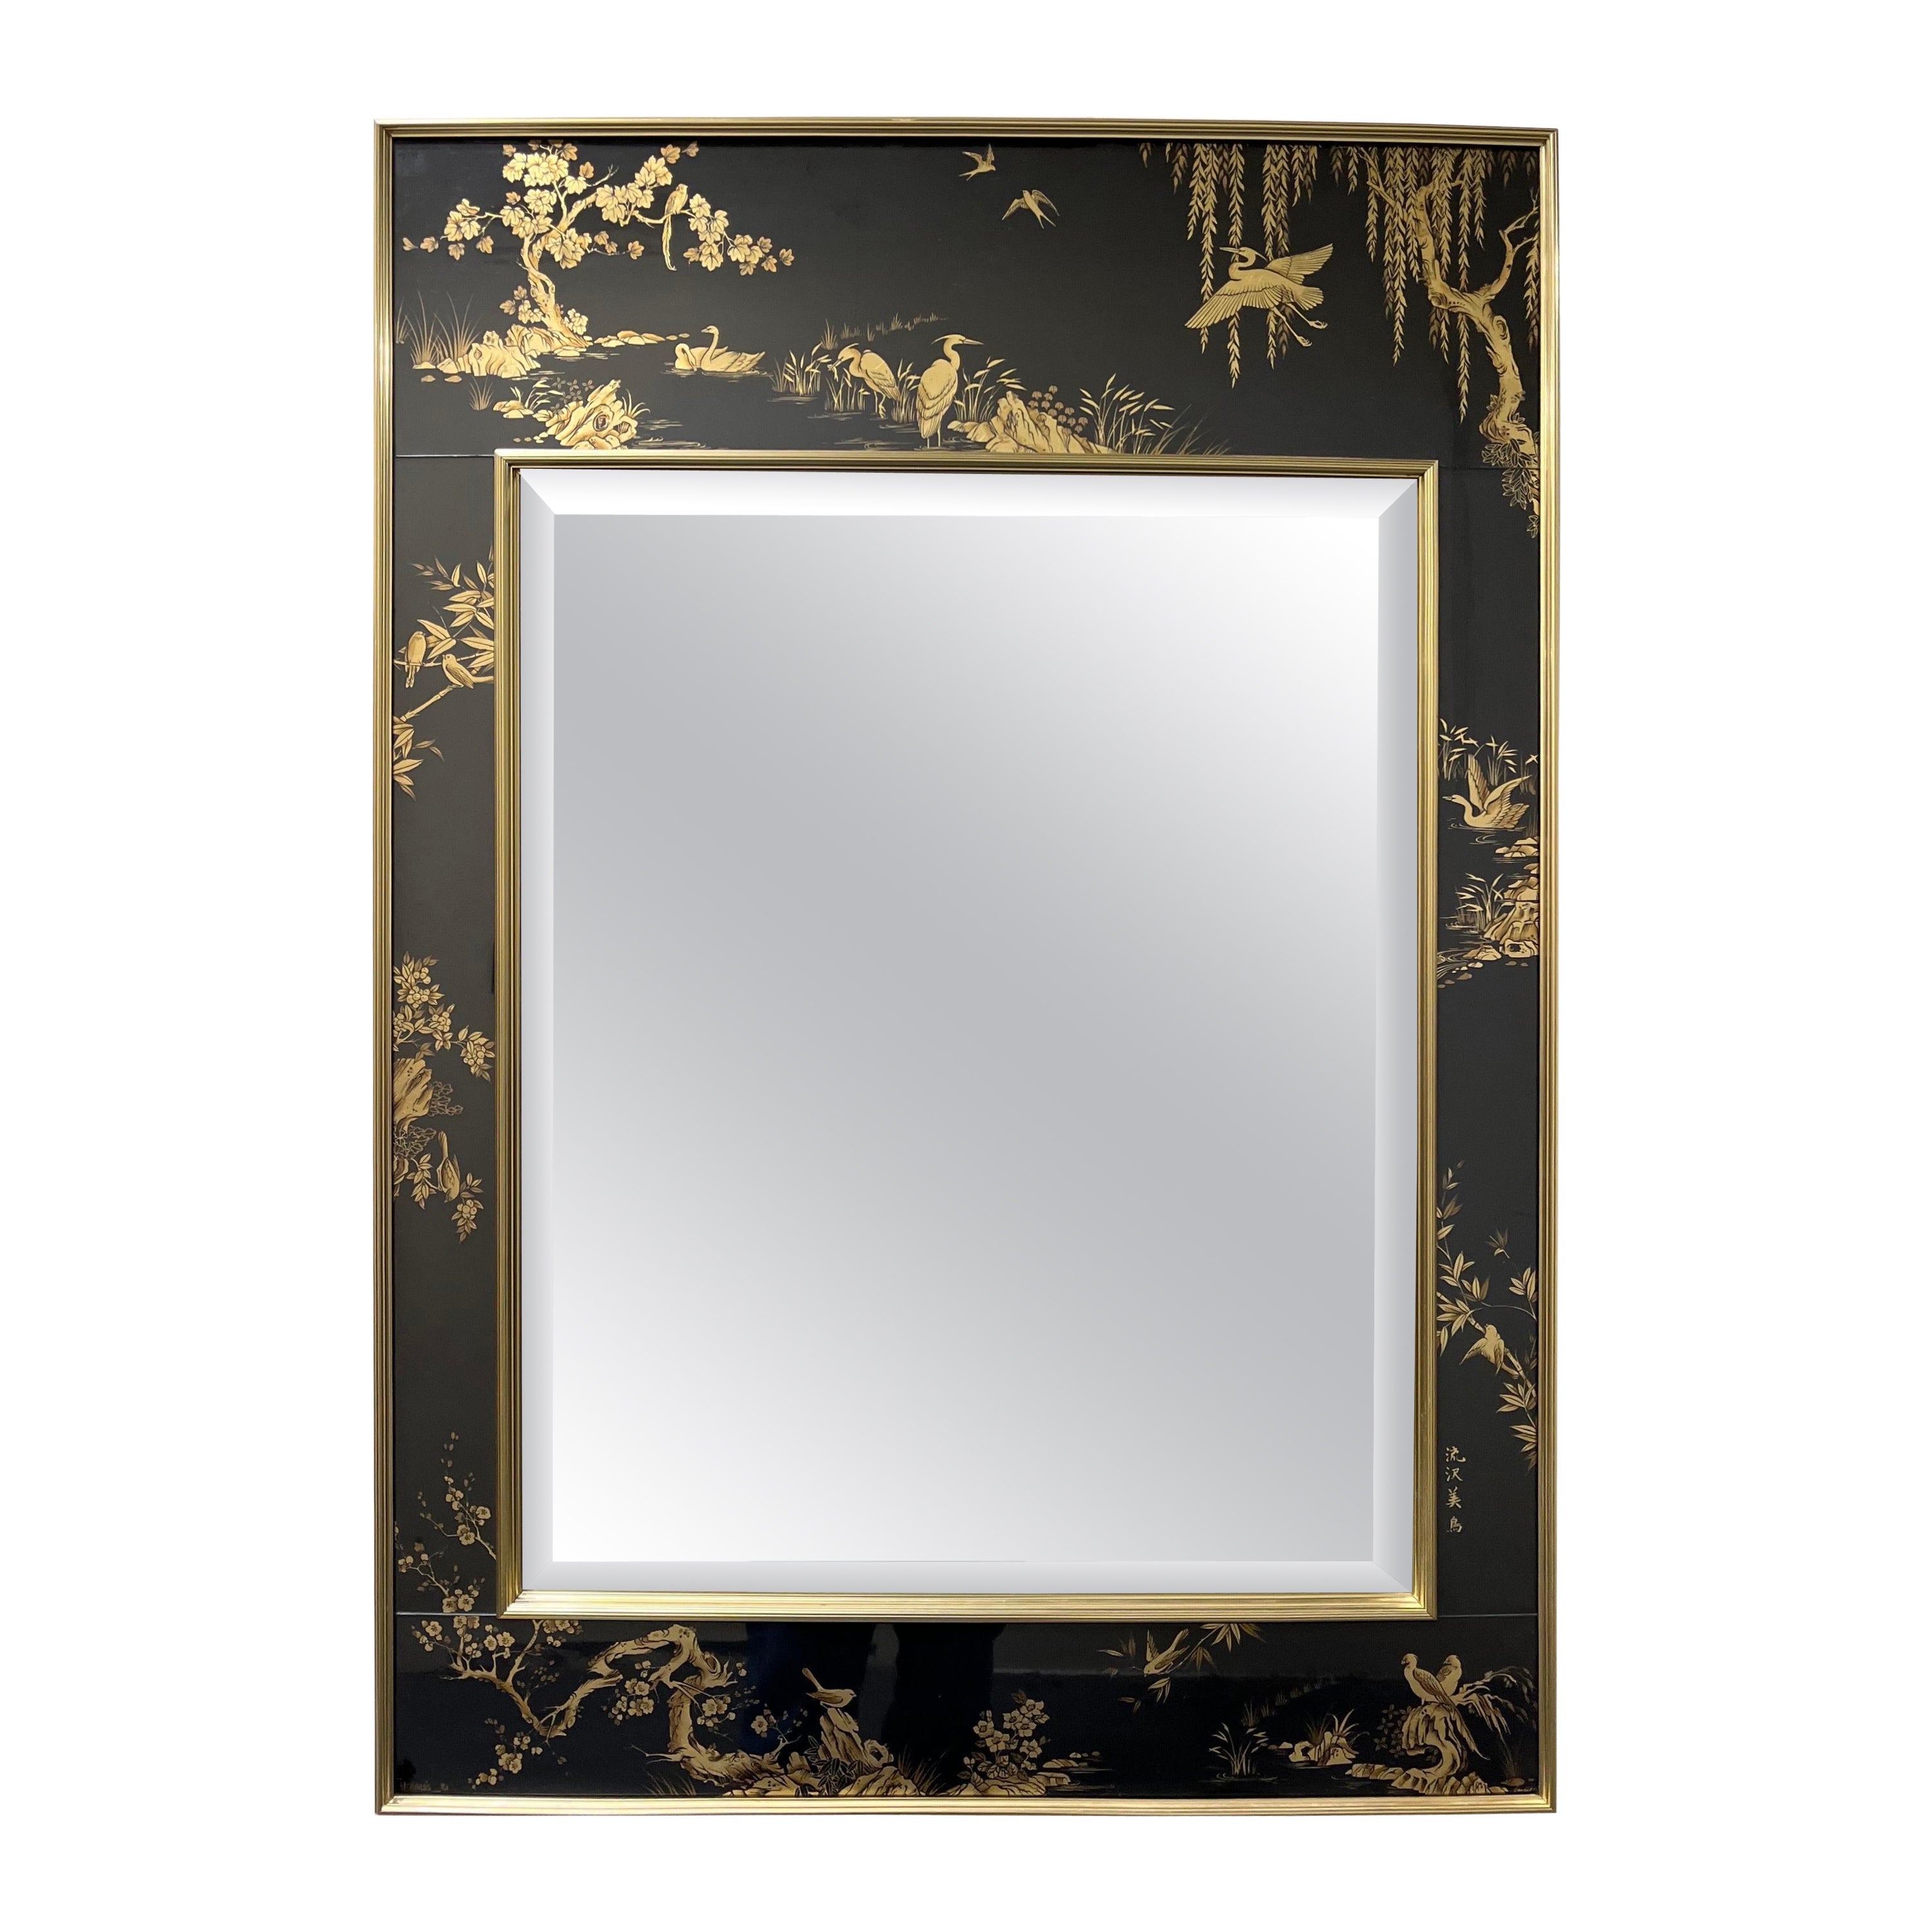 La Barge Eglomise Chinoiserie Mirror with Rare Black Background For Sale